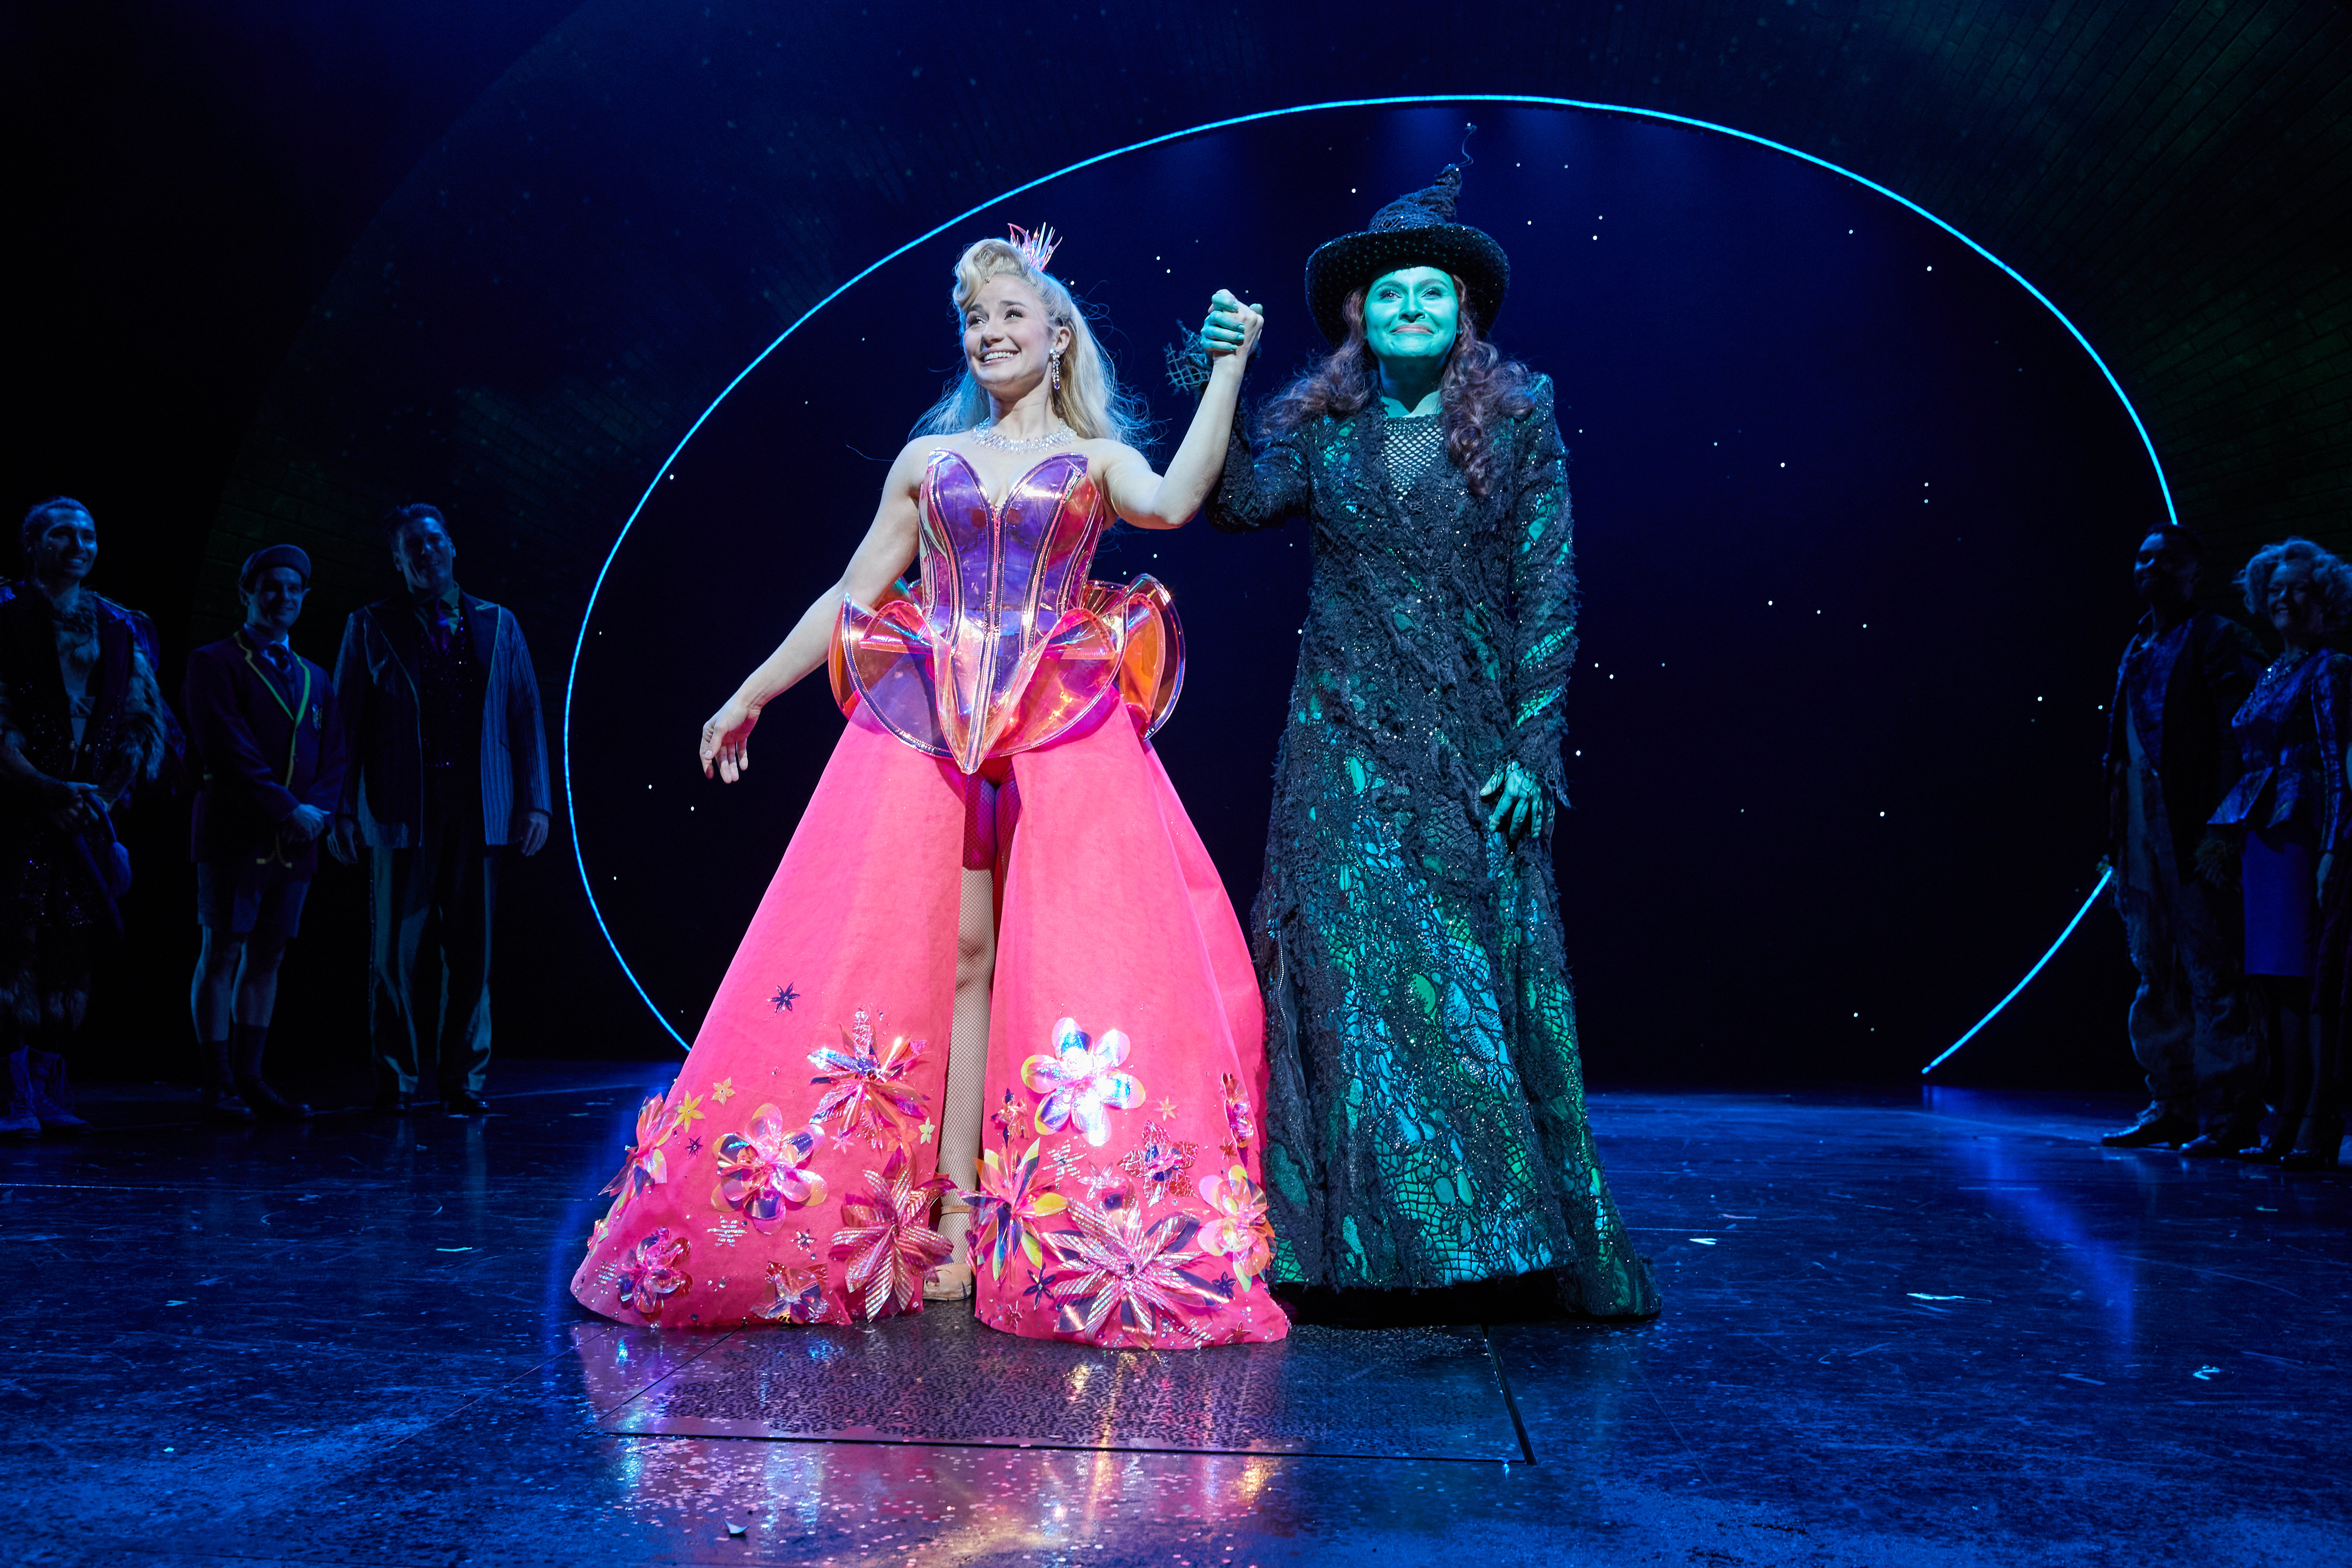 Premiere of the musical “Wicked”